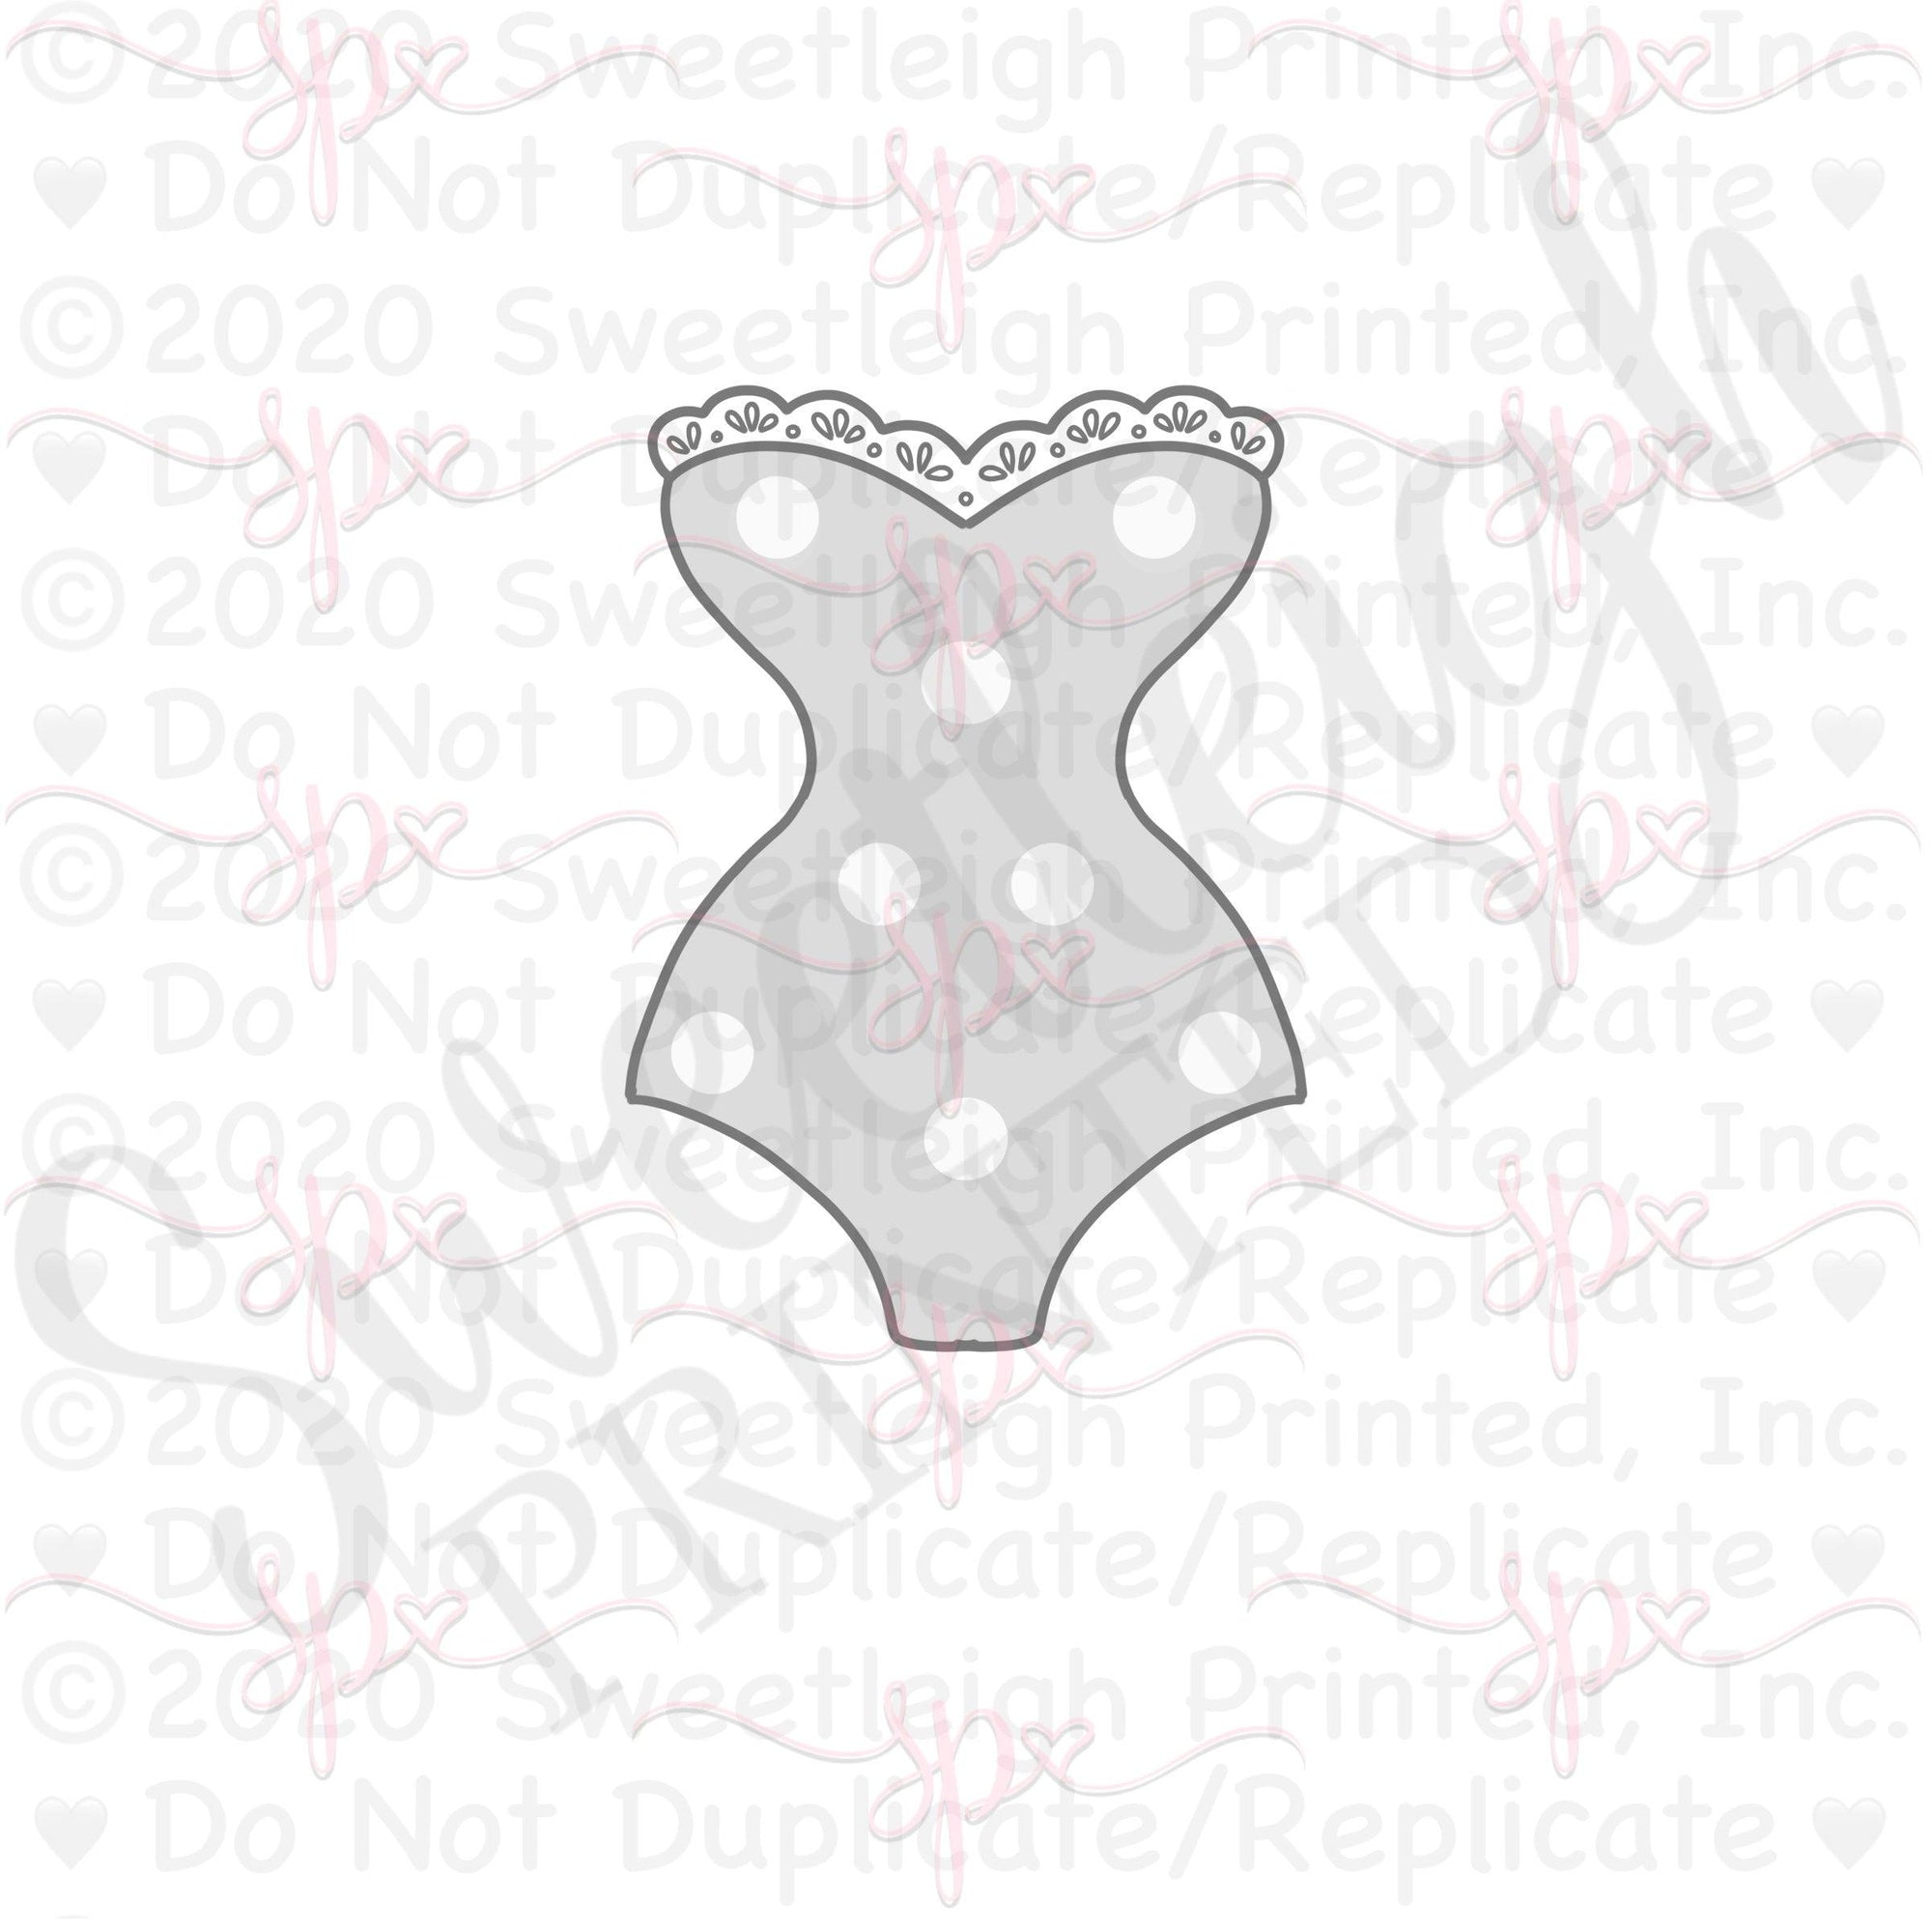 Retro Swimsuit Cookie Cutter - Sweetleigh 